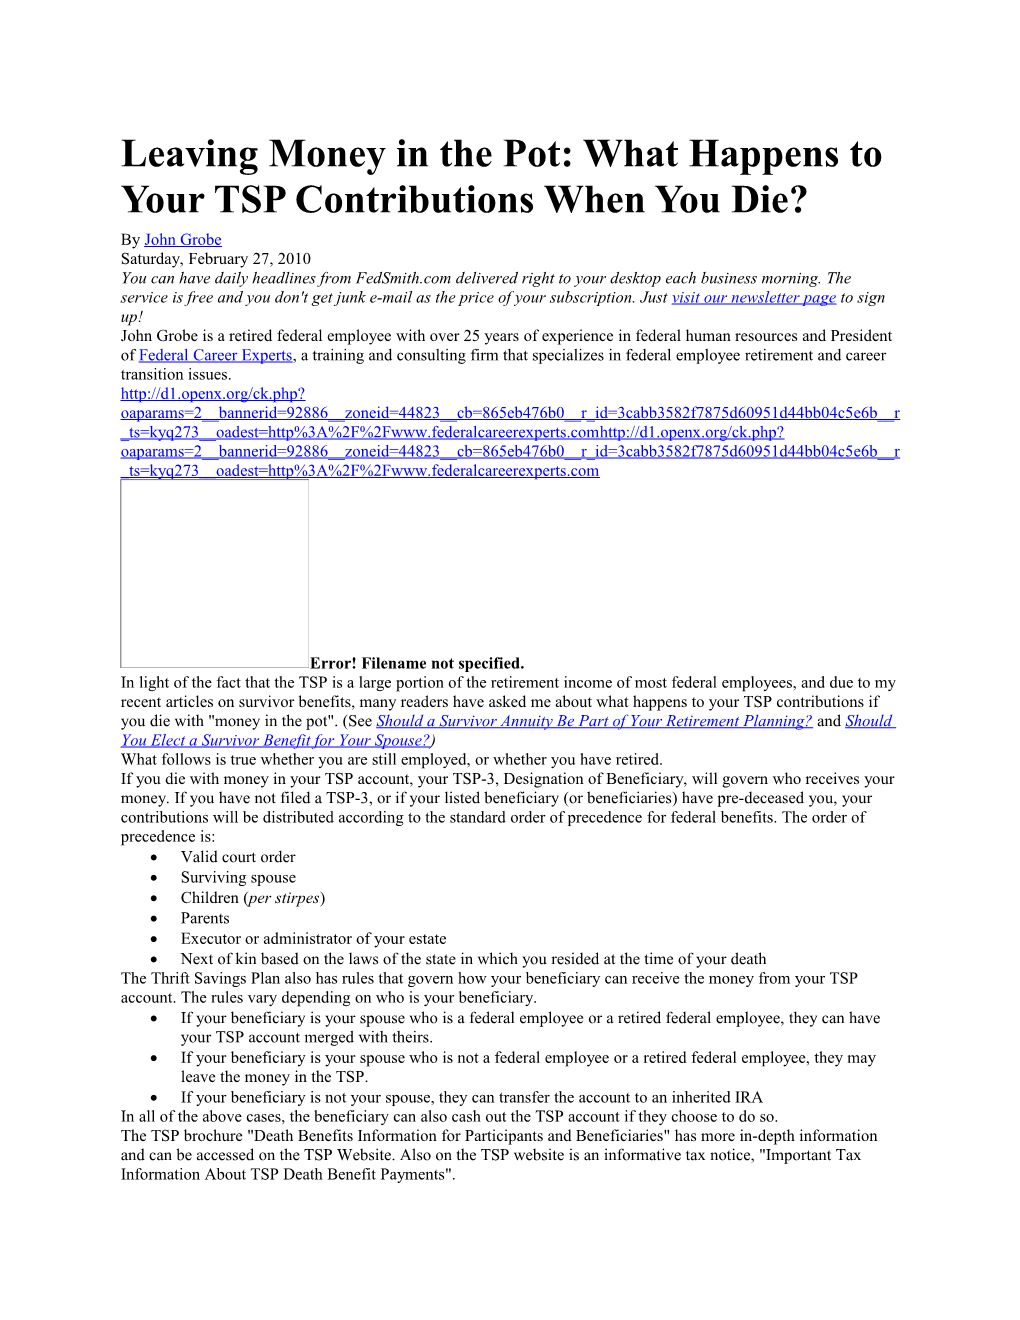 Leaving Money in the Pot: What Happens to Your TSP Contributions When You Die